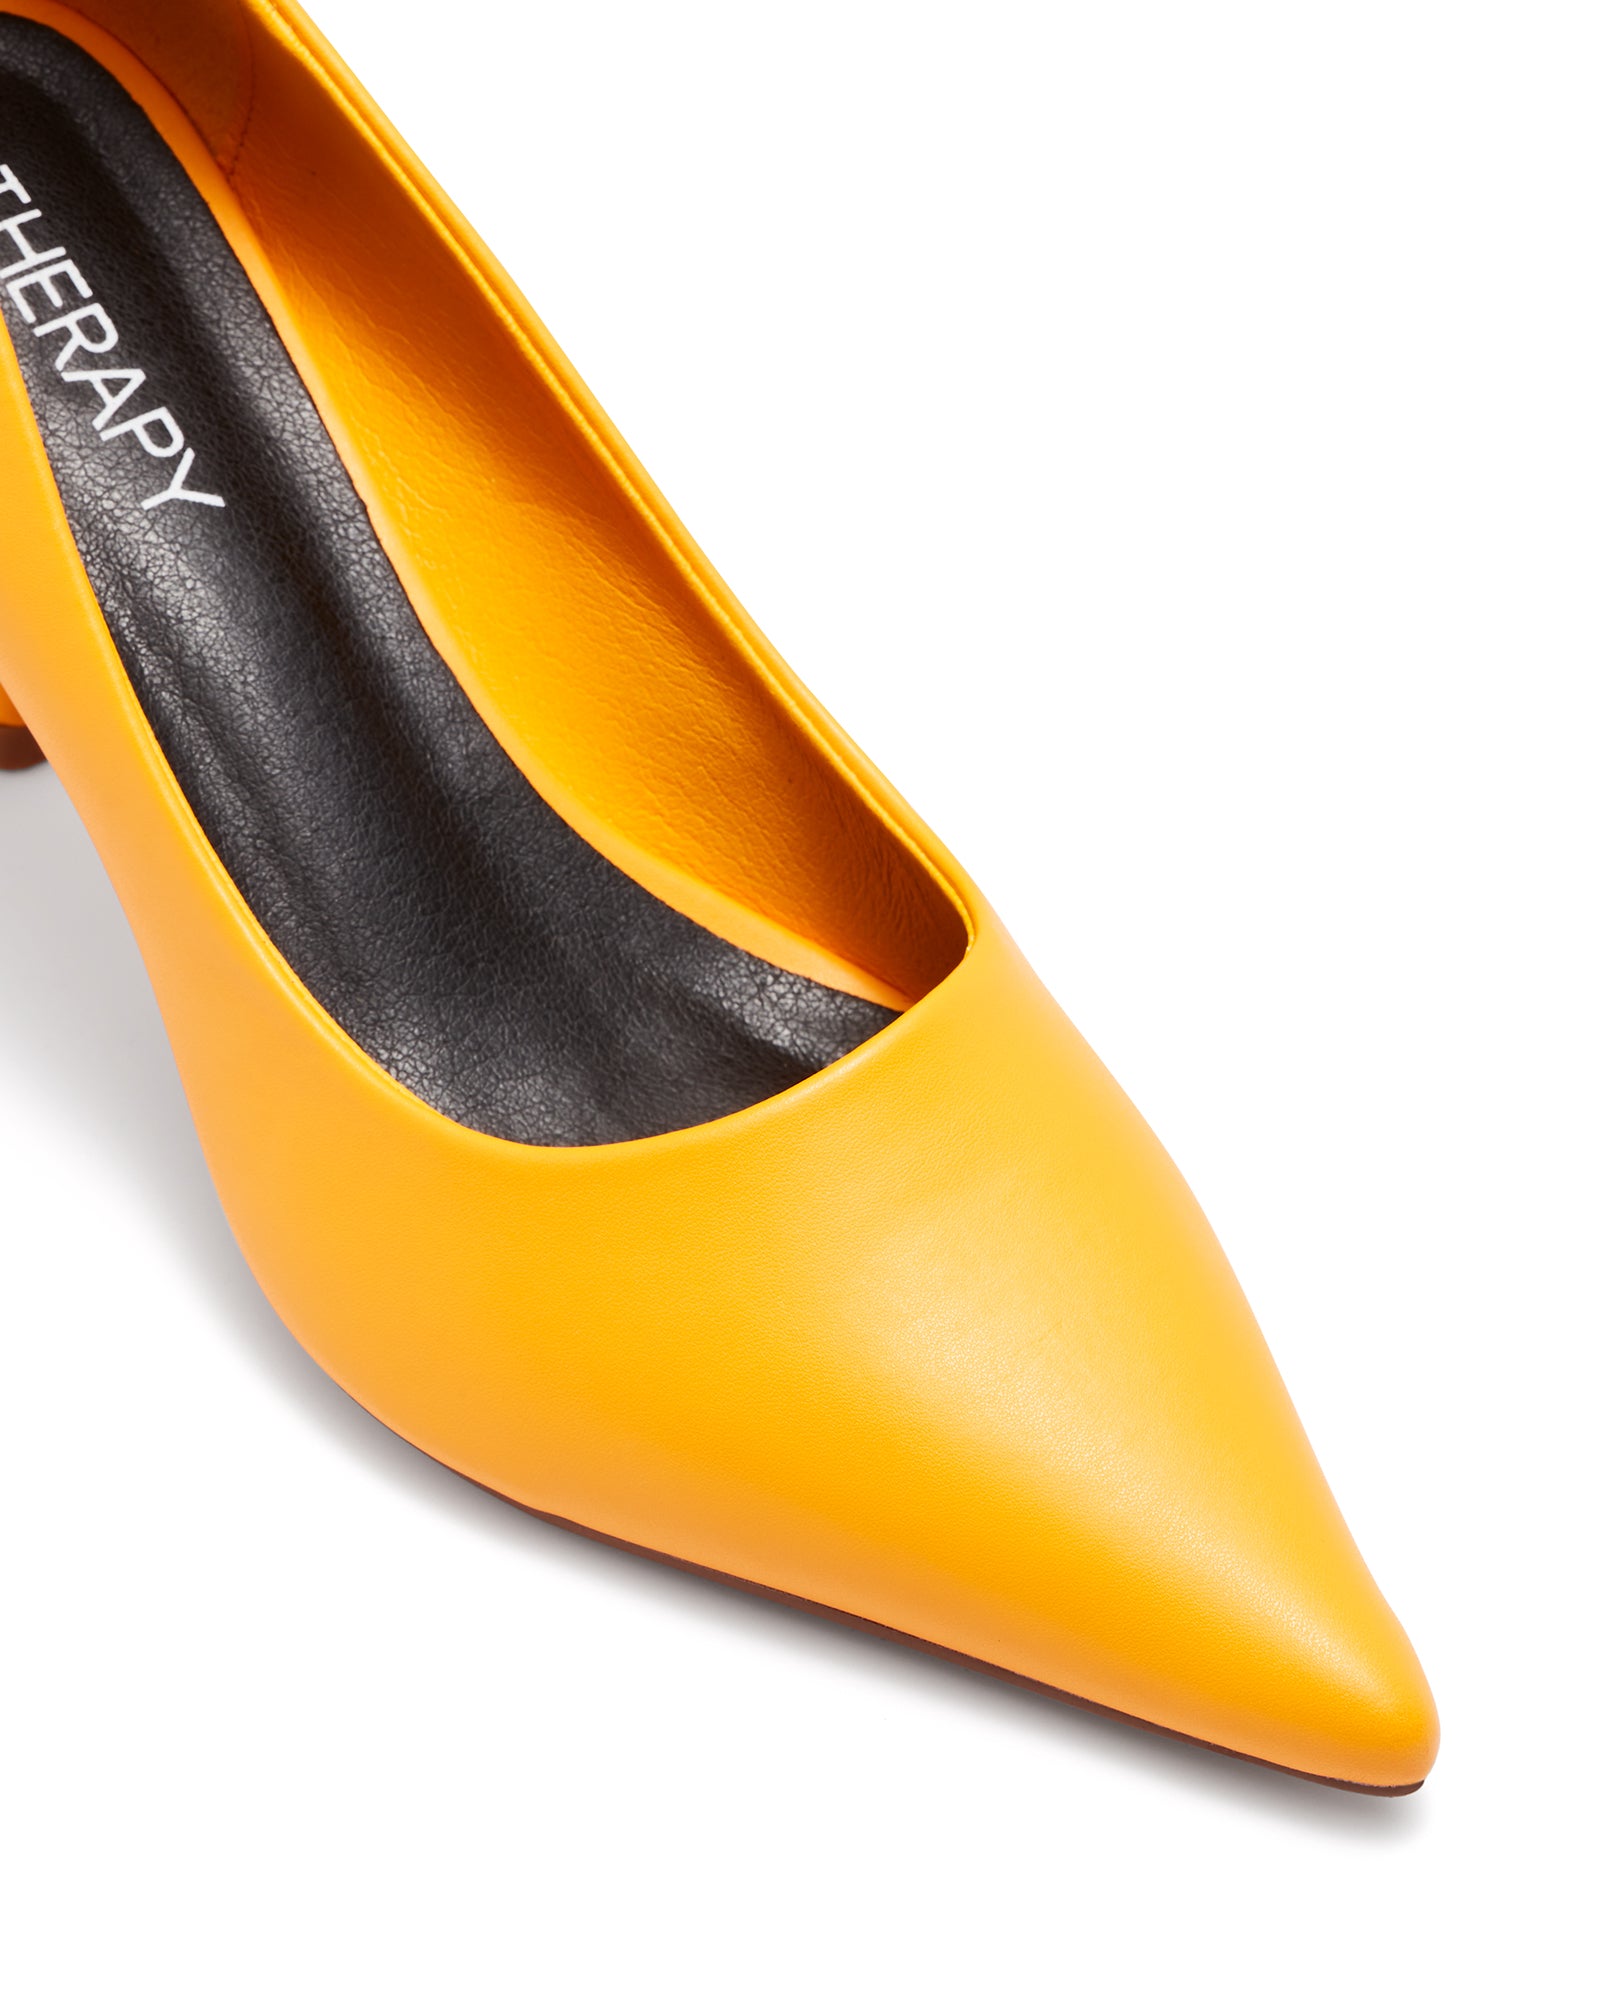 Therapy Shoes Sabrina Mango | Women's Heels | Pumps | Office 